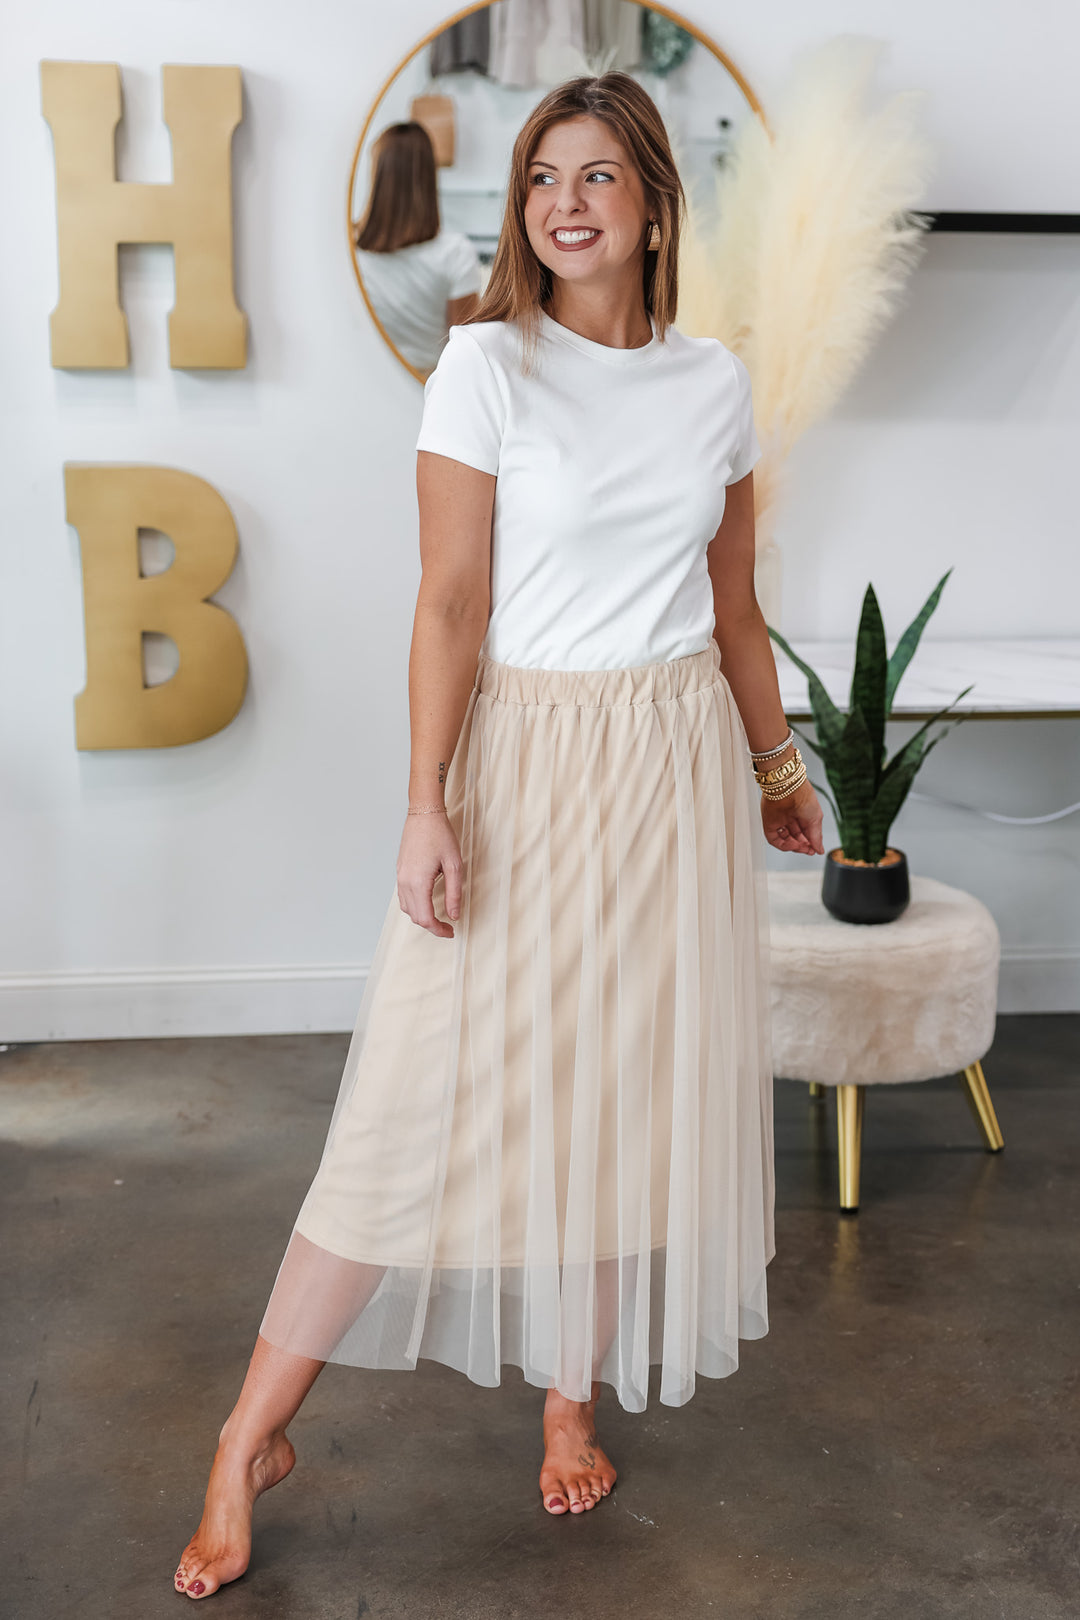 A brunette woman standing in a shop wearing a champagne colored tulle skirt with a basic white tee.